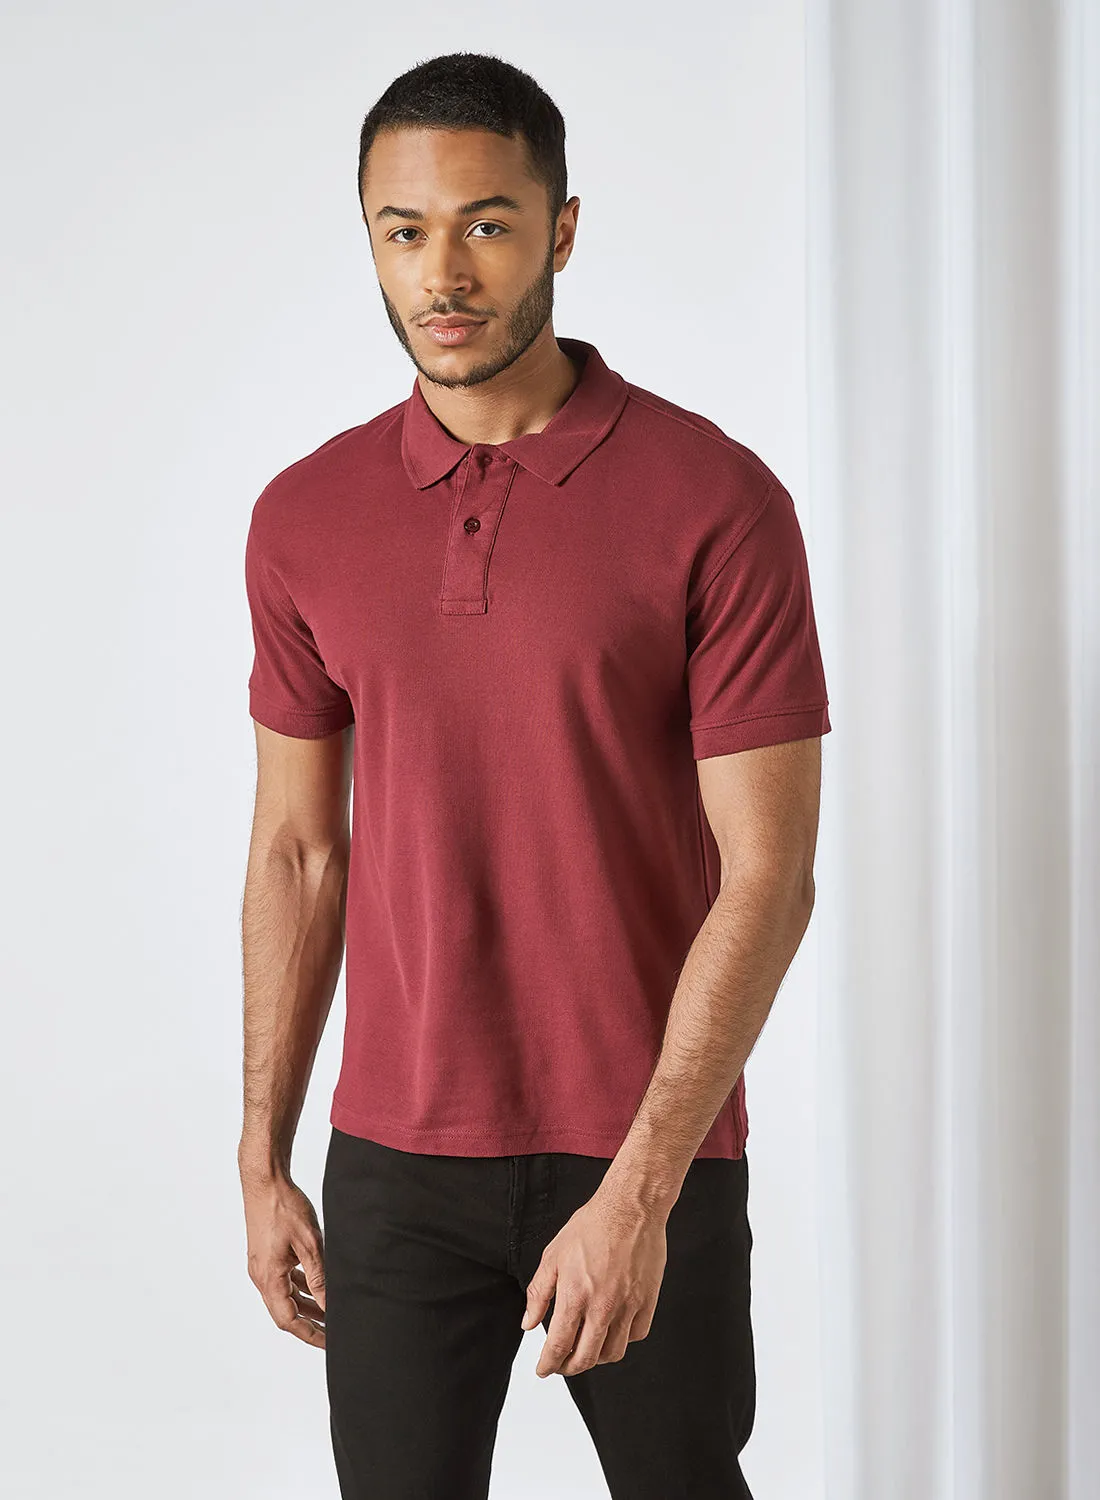 STATE 8 Solid Polo (عبوة من 3) متعدد